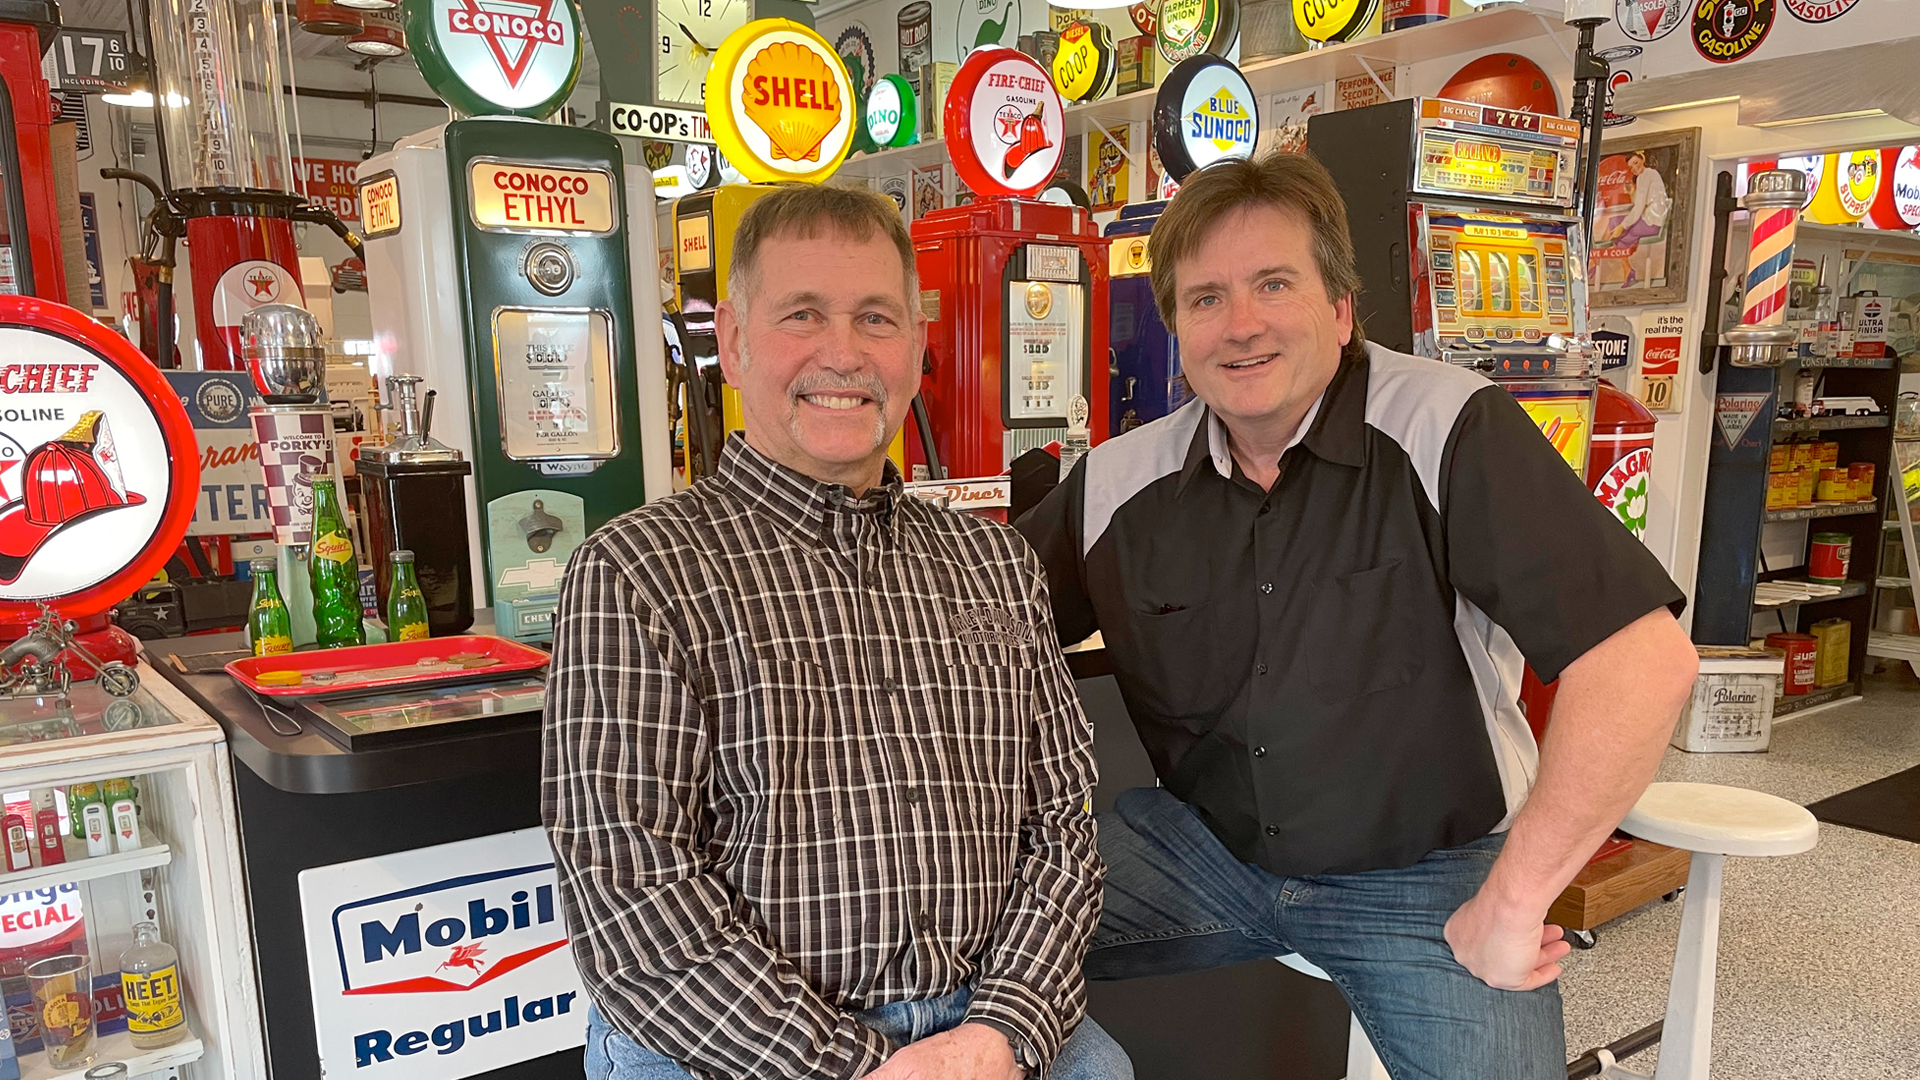 Wally Kill of Morris shares his collection of automotive memorabilia with Pioneer PBS Executive Producer Timothy Hale Bakken in the upcoming WHEELS: Classics and Collections program